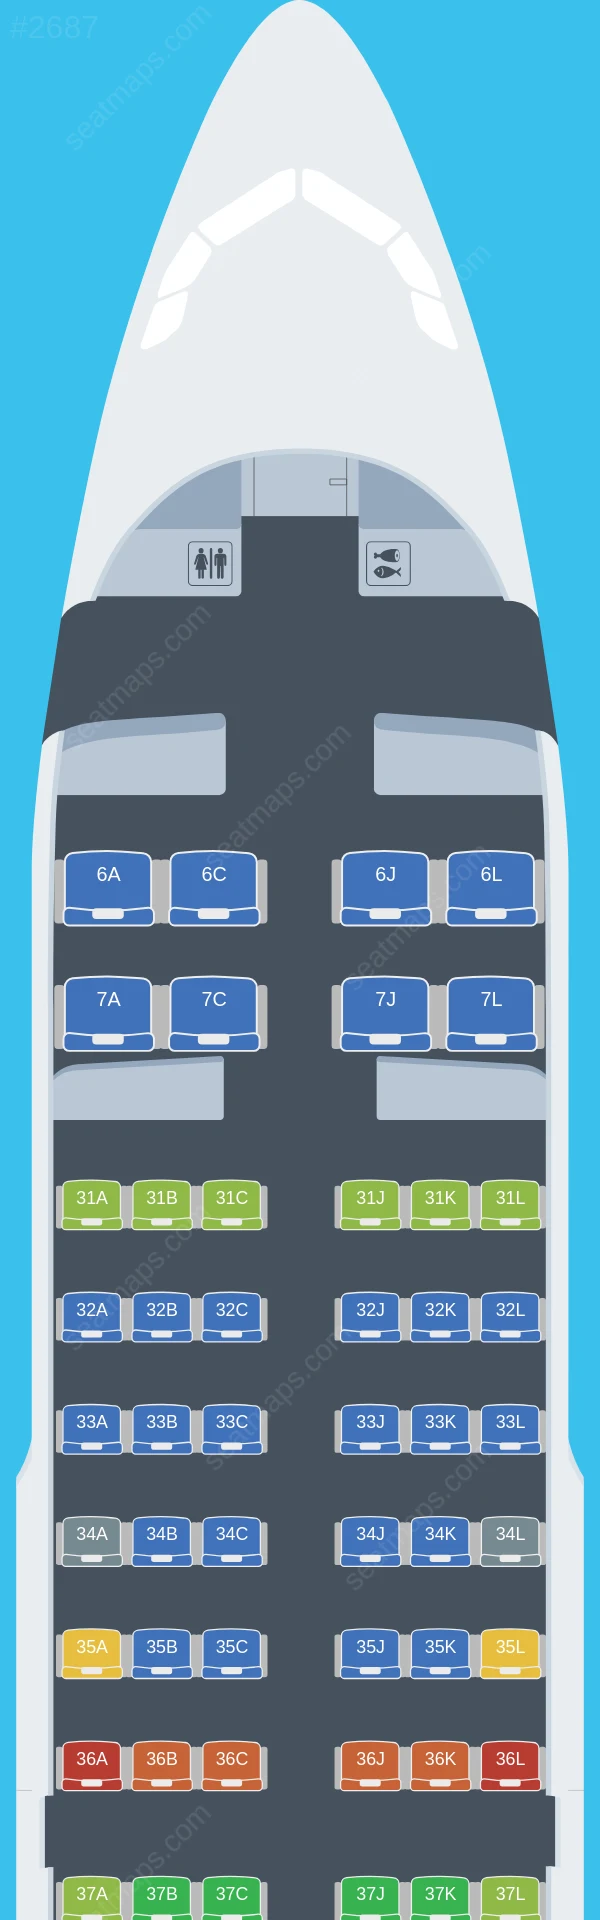 China Eastern Airbus A319-100 seatmap preview